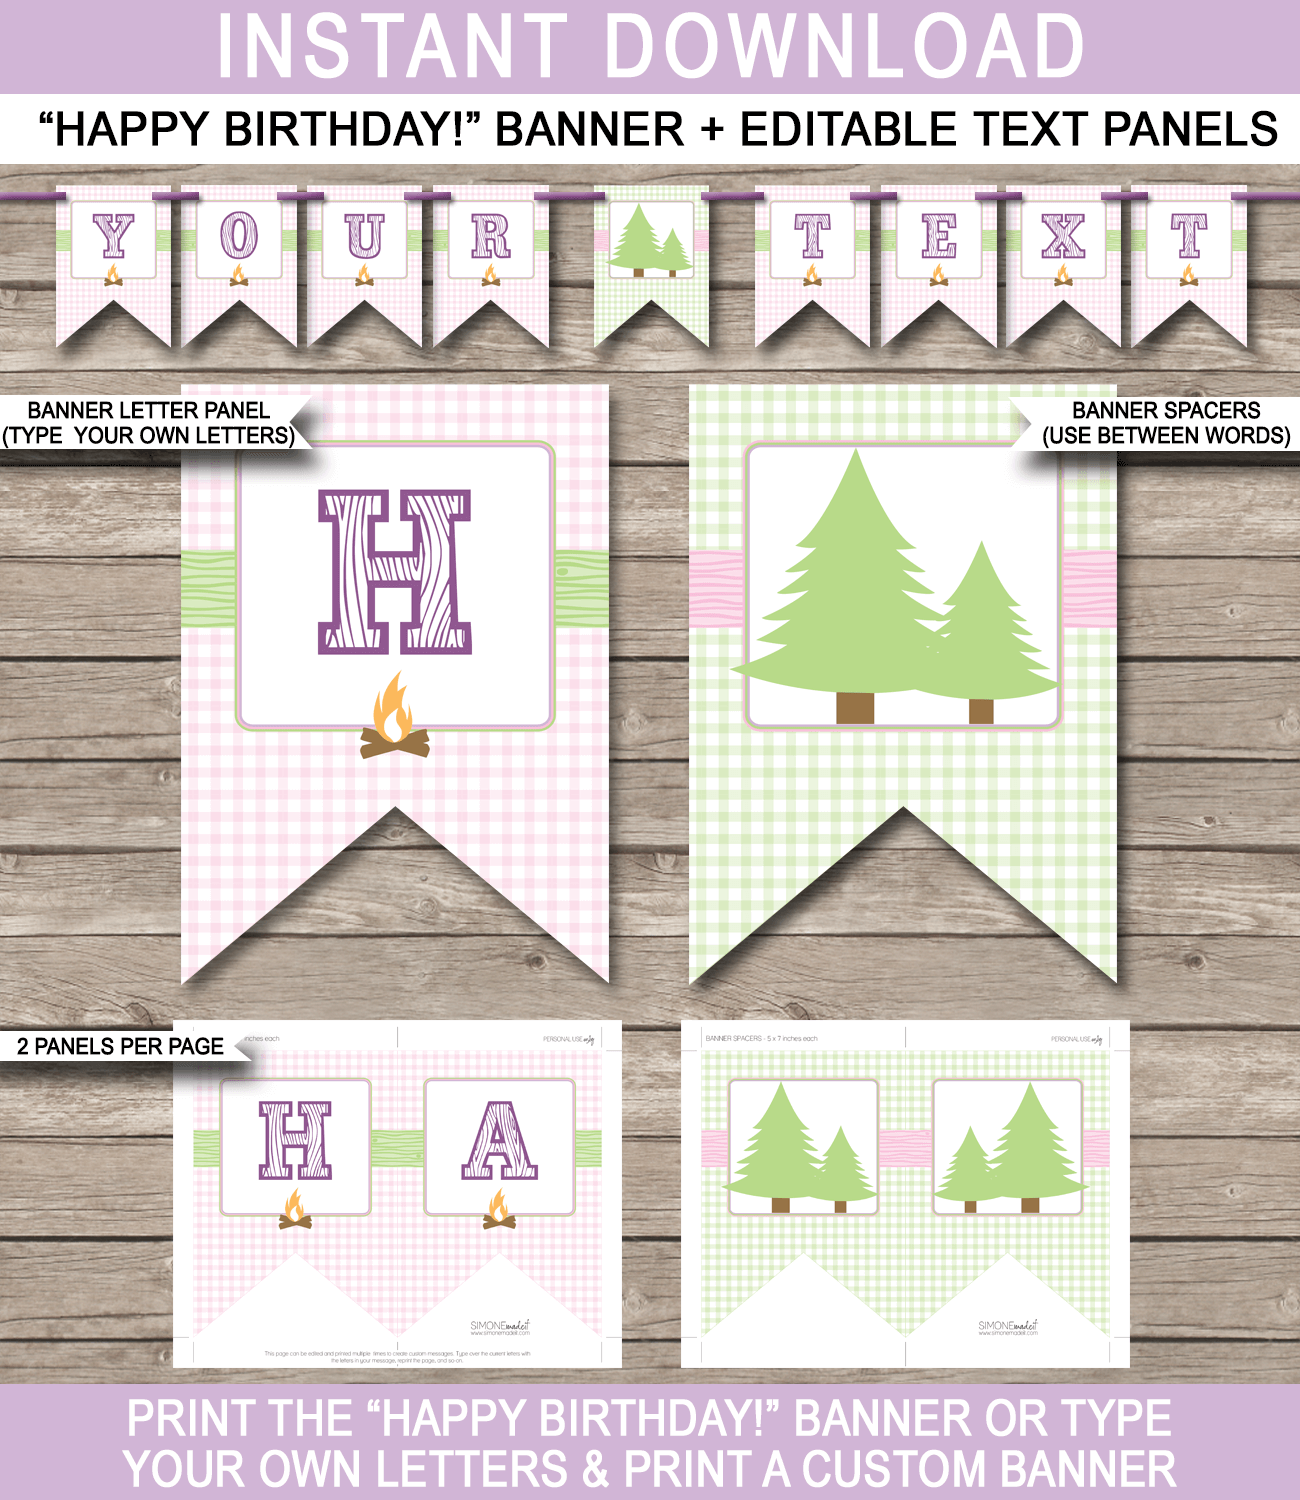 Glamping Party Pennant Banner Template - Glam Camping Bunting - Happy Birthday Banner - Birthday Party - Editable and Printable DIY Template - INSTANT DOWNLOAD $4.50 via simonemadeit.com